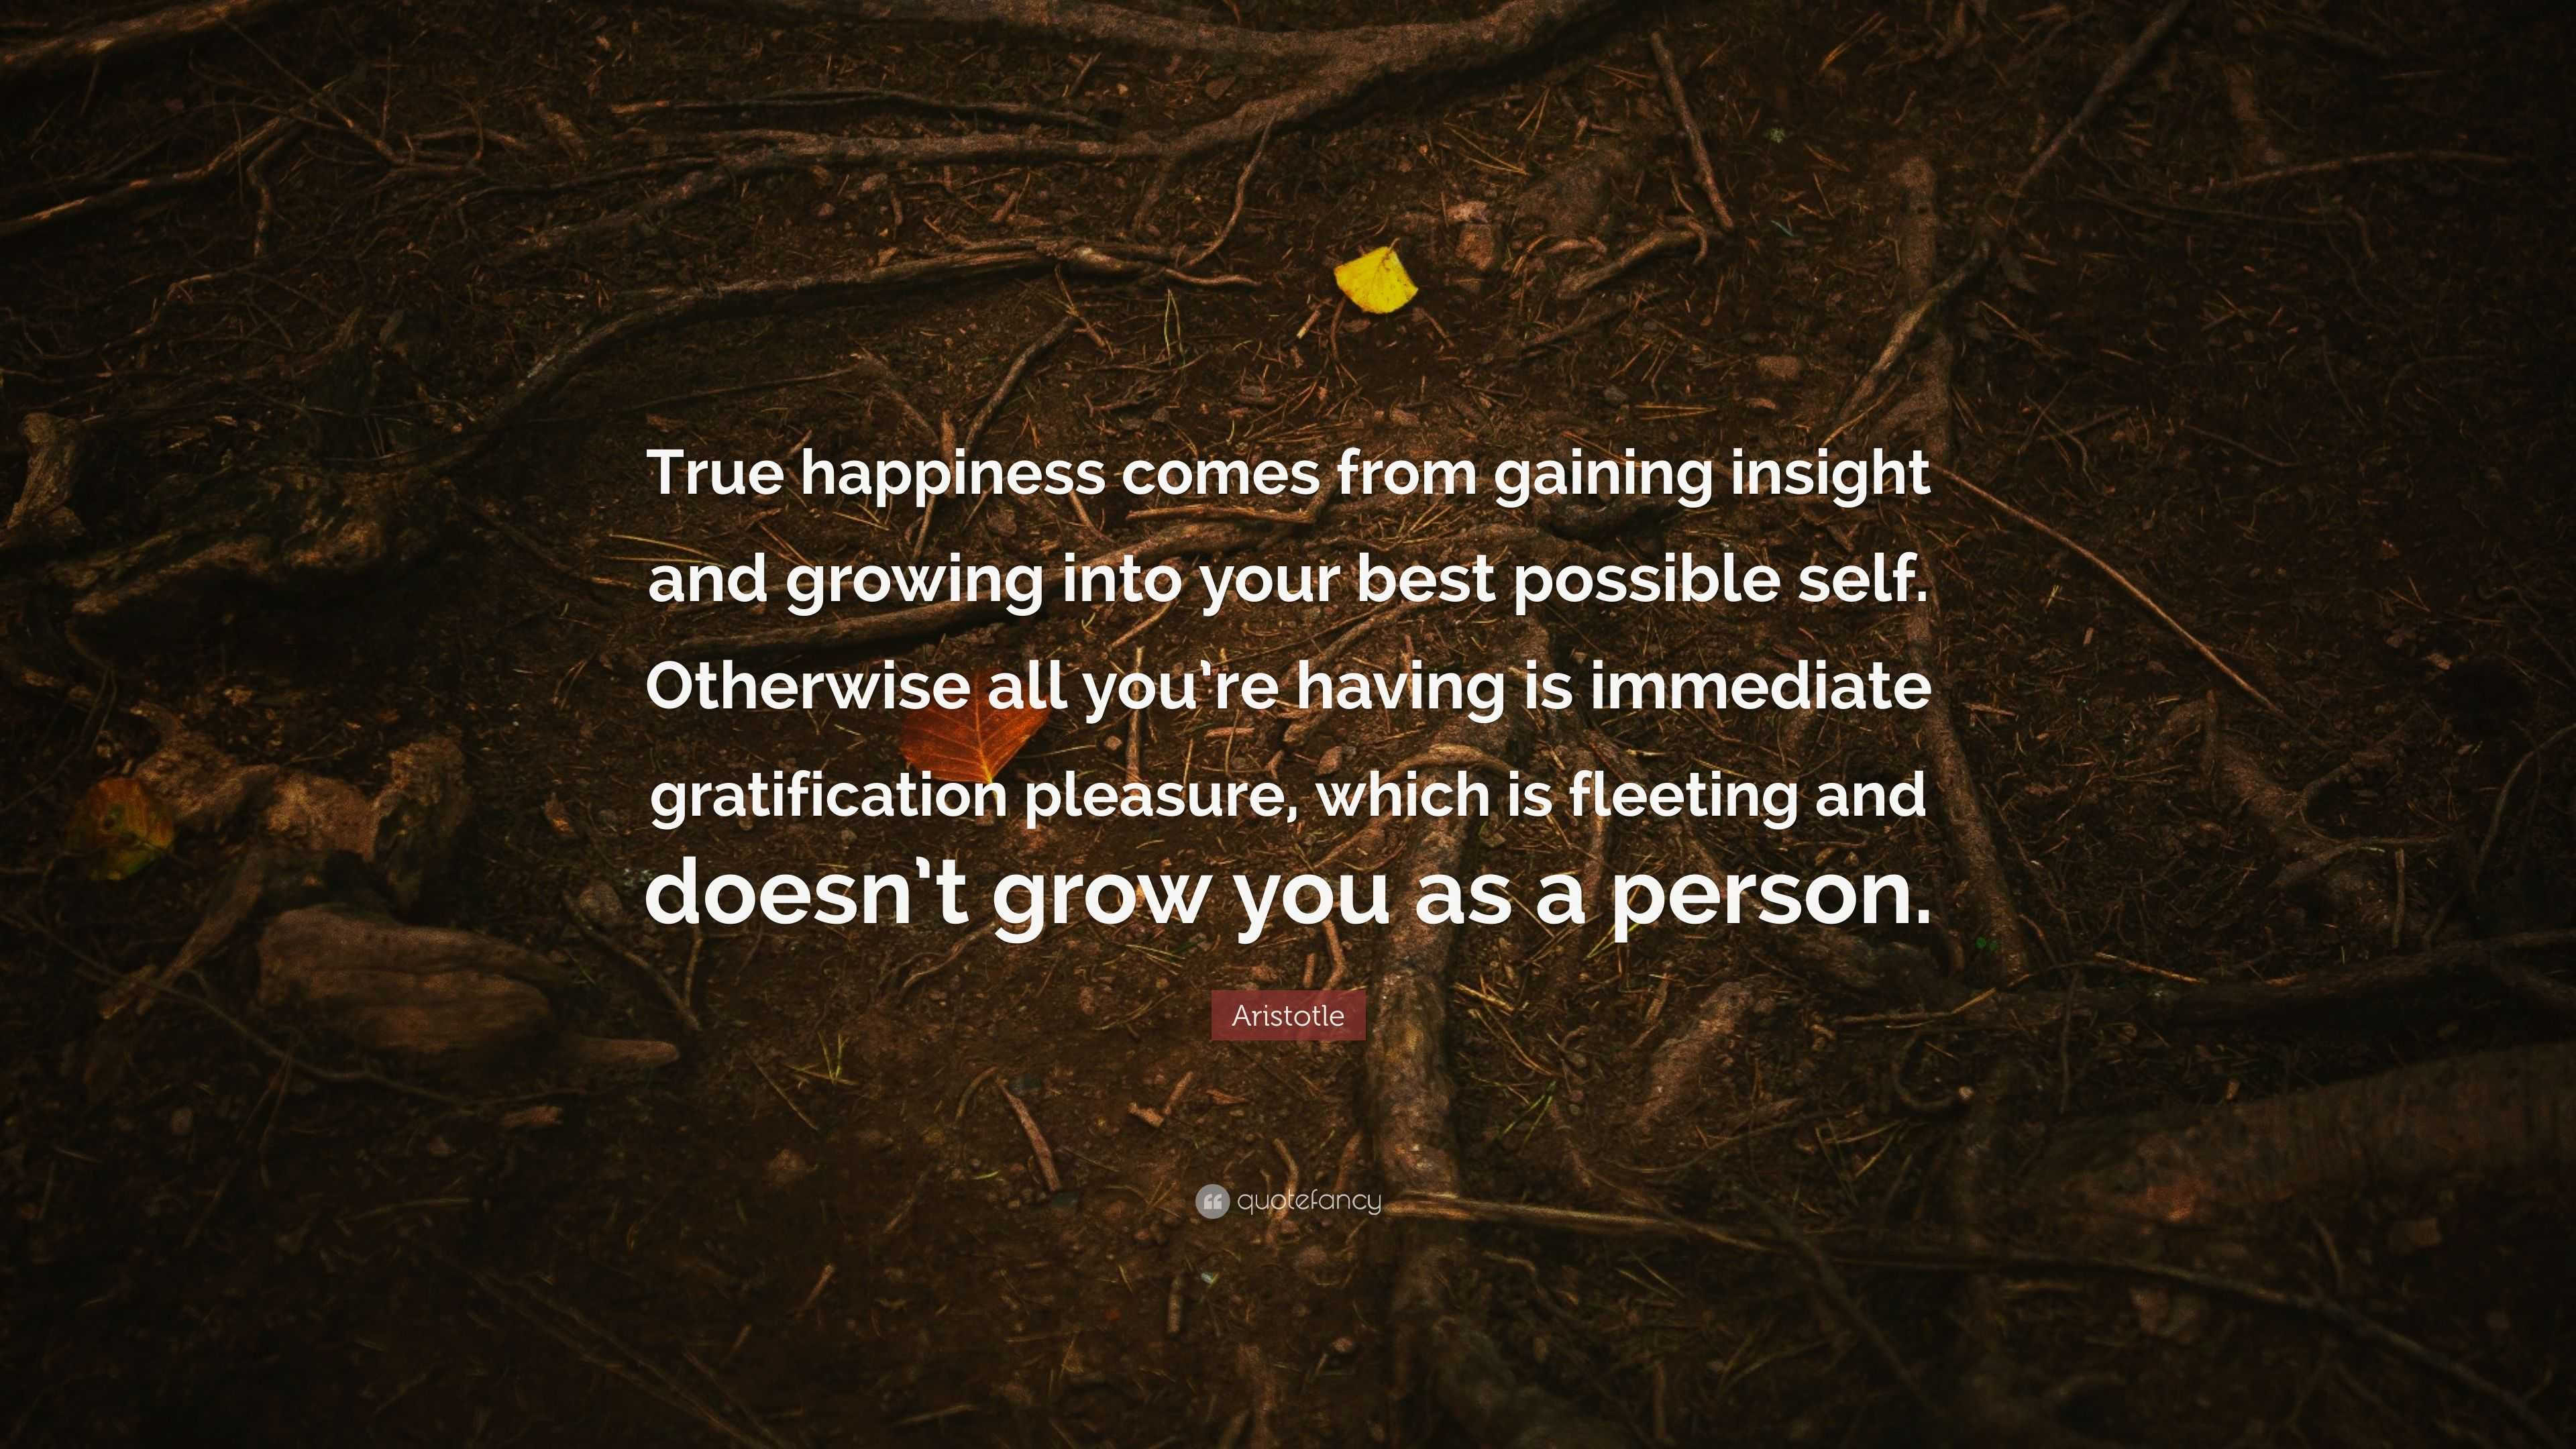 Aristotle Quote: “True happiness comes from gaining insight and growing